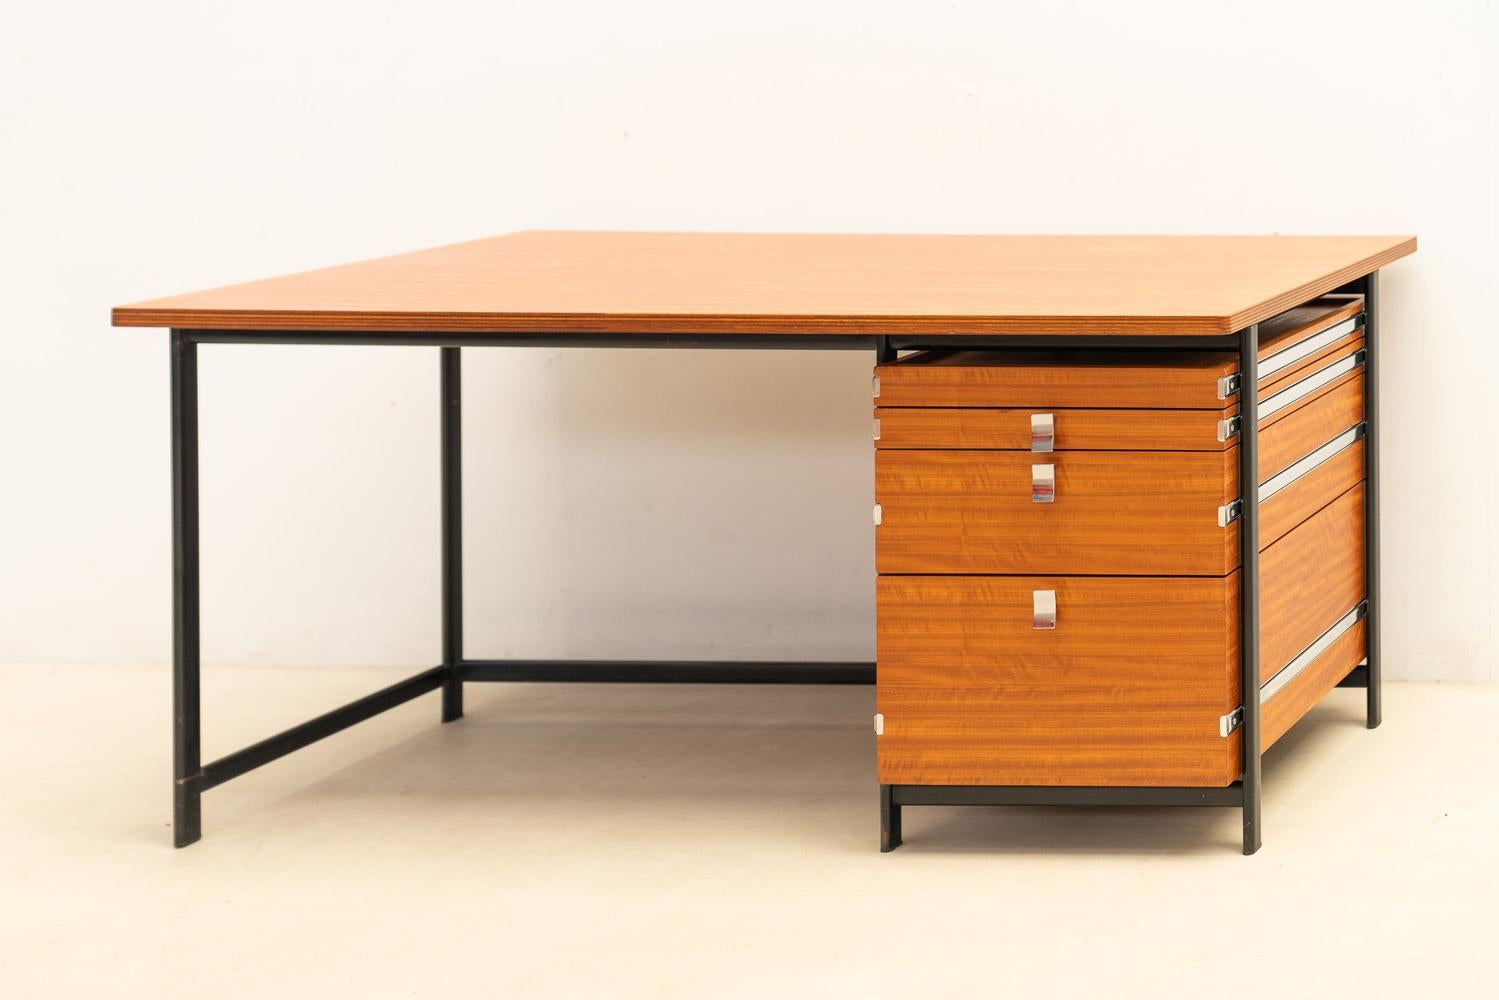 Desk designed by Jules Wabbes and manufactured by Mobilier Universel in the 1960s, holds a significant place in the history of Belgian furniture design.
Constructed with a black steel base and wooden drawers and top, the desk achieves a harmonious